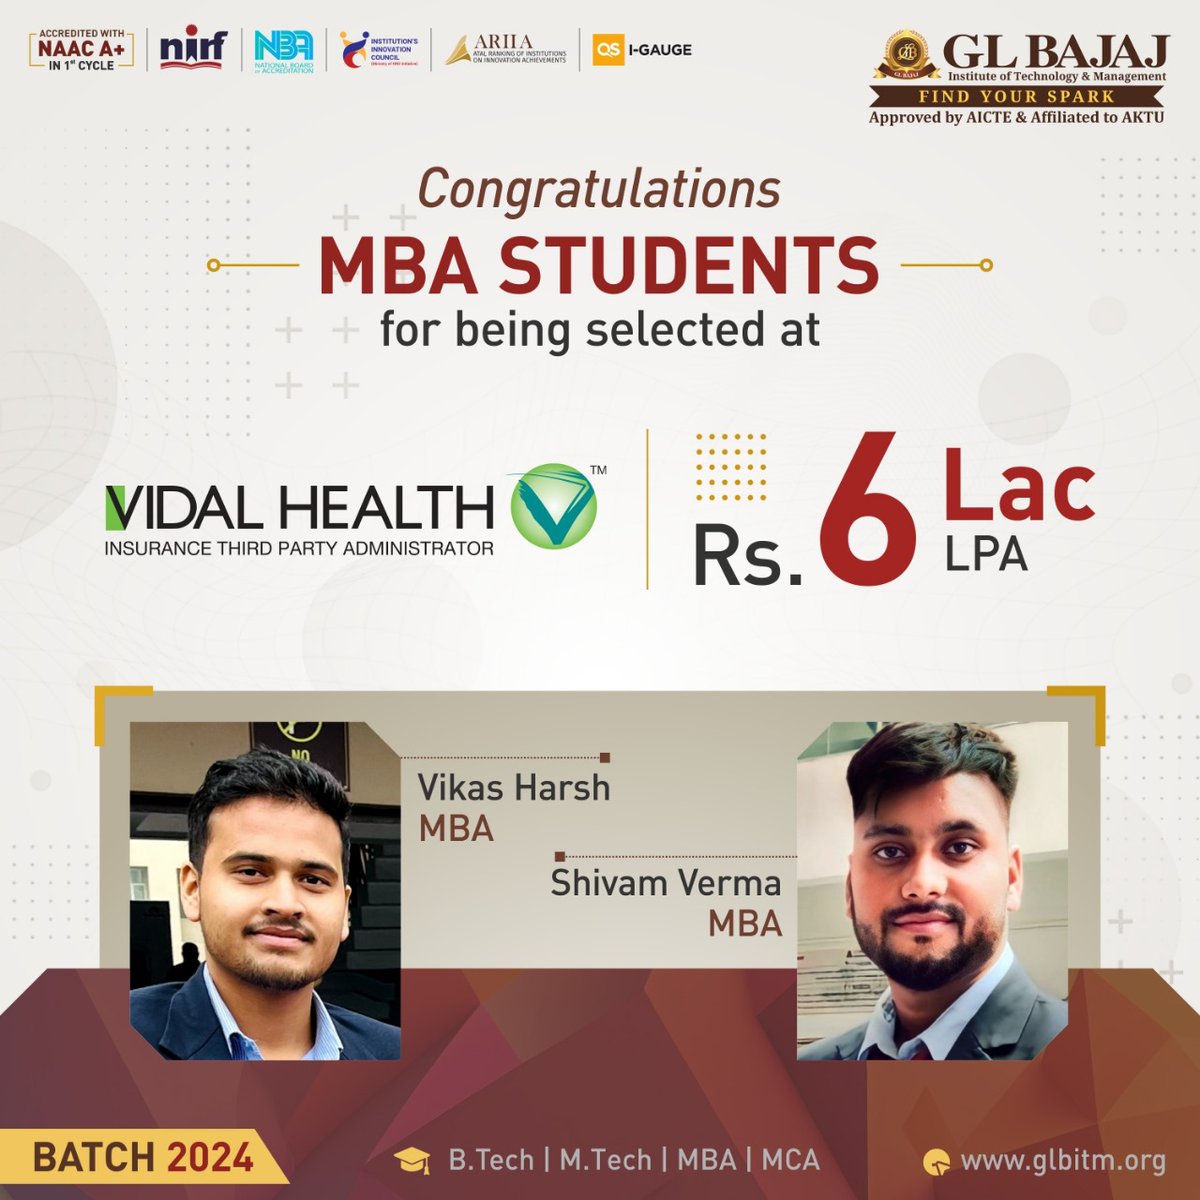 #GLBajaj (GLBITM) is proud to announce the placement of its brilliant students Shivam Verma and Vikas Harsh, MBA (Marketing, Finance & HR) Batch 2024 at @VidalHealthcare 
#GLBITM #Placement #campusplacement #jobs2024 #VidalHealth #studentplacement #MBA #Marketing #Finance #HR